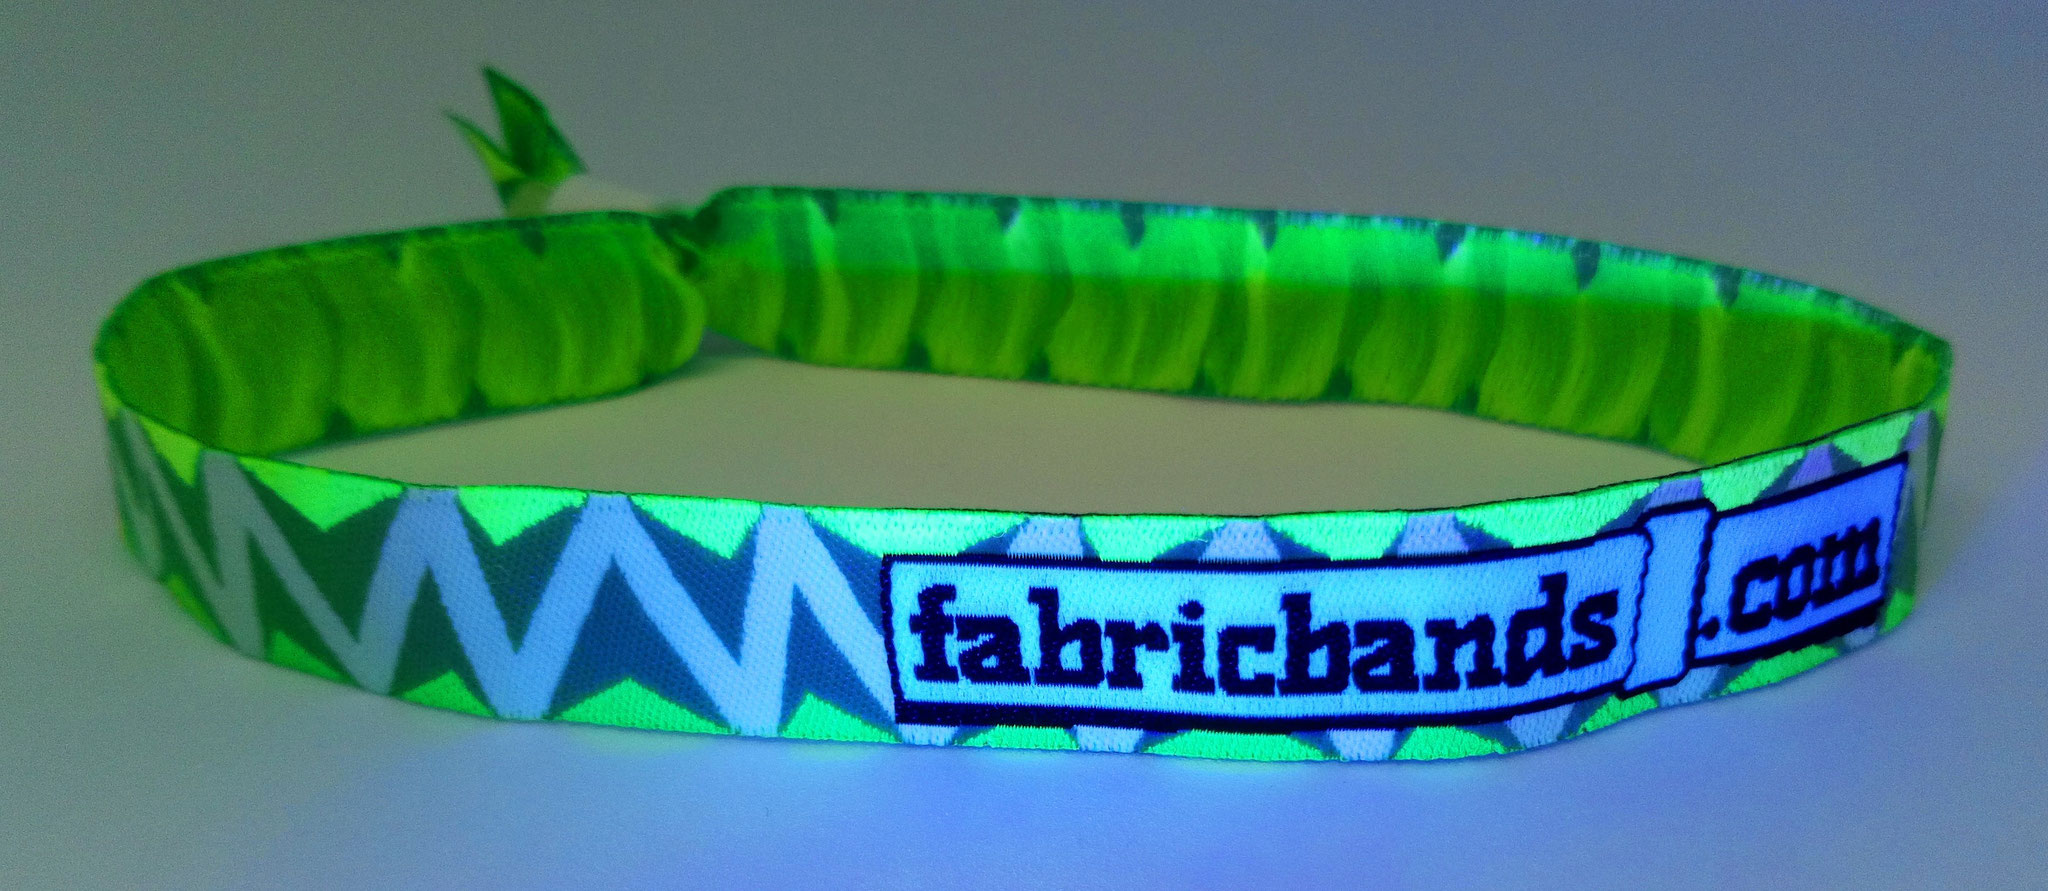 Ask about our glow in dark options